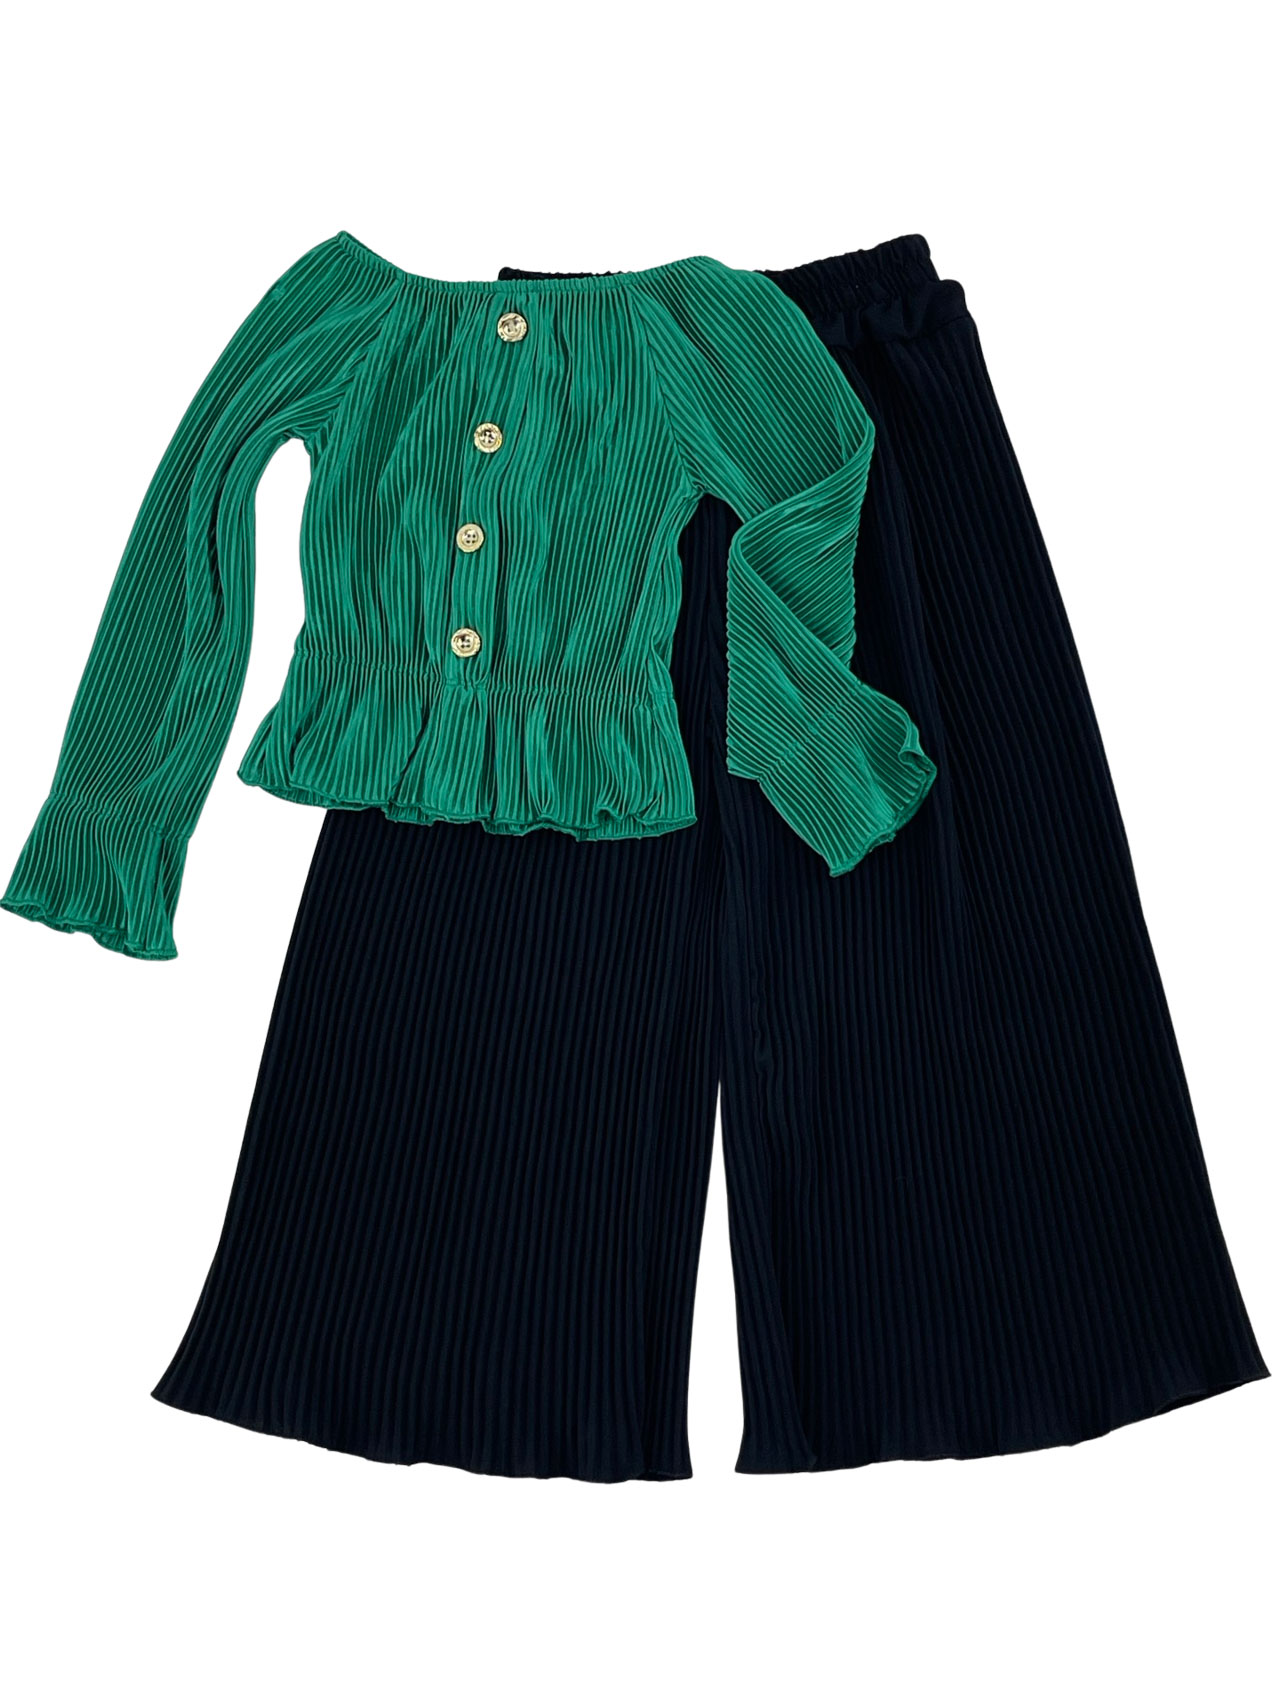 Girl's blouse-pantlet pleated set code 23985564 top-bottom